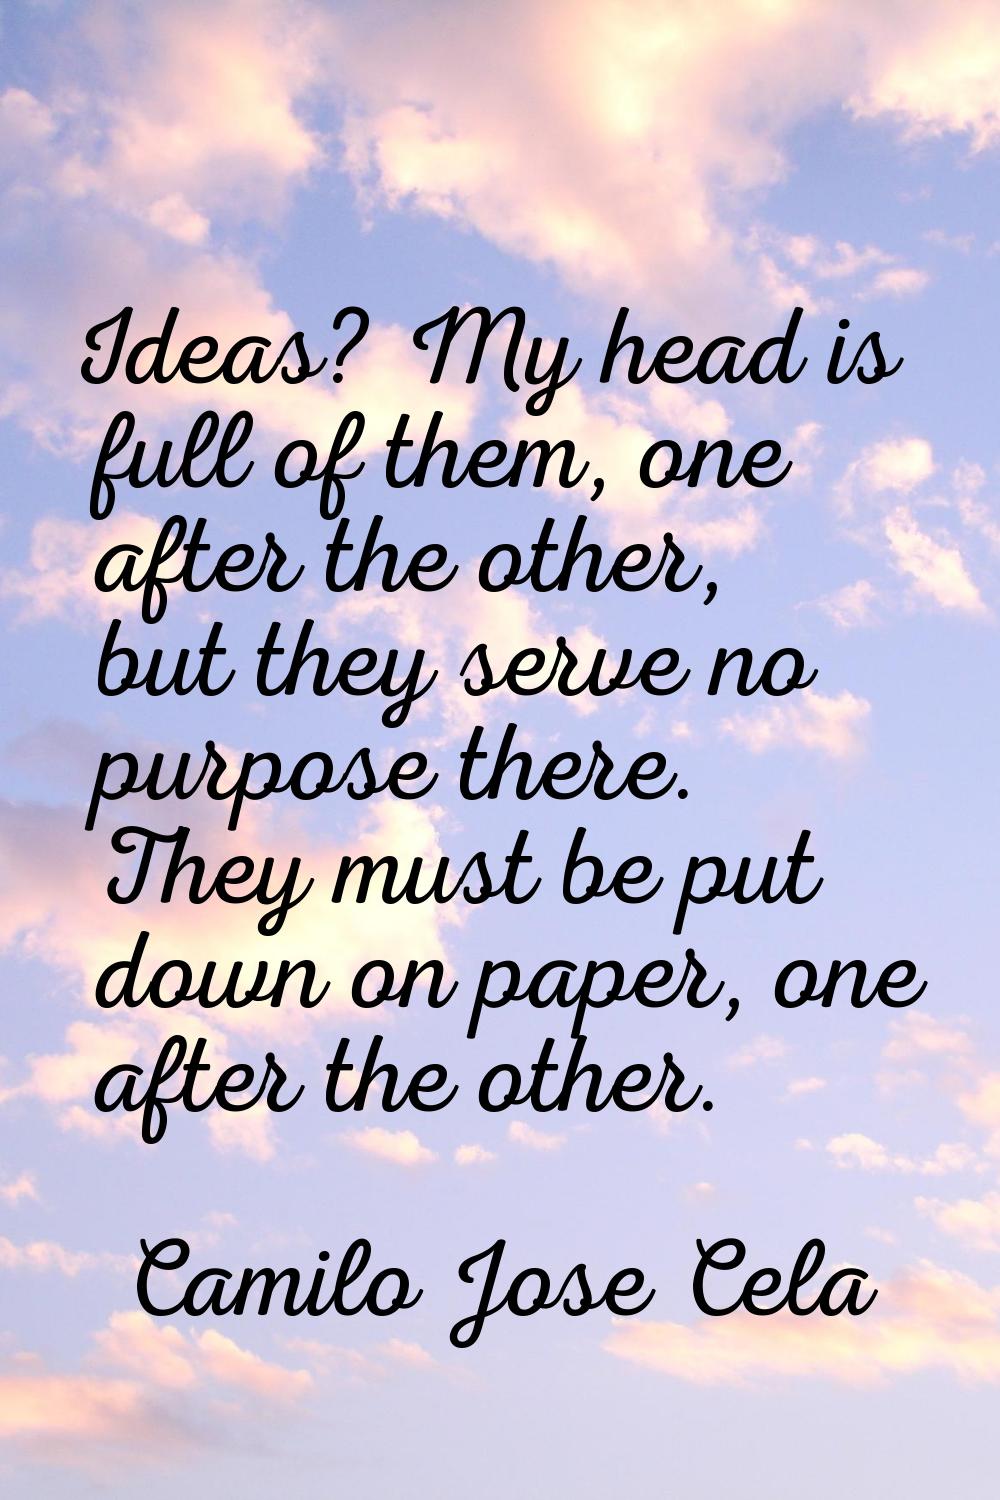 Ideas? My head is full of them, one after the other, but they serve no purpose there. They must be 